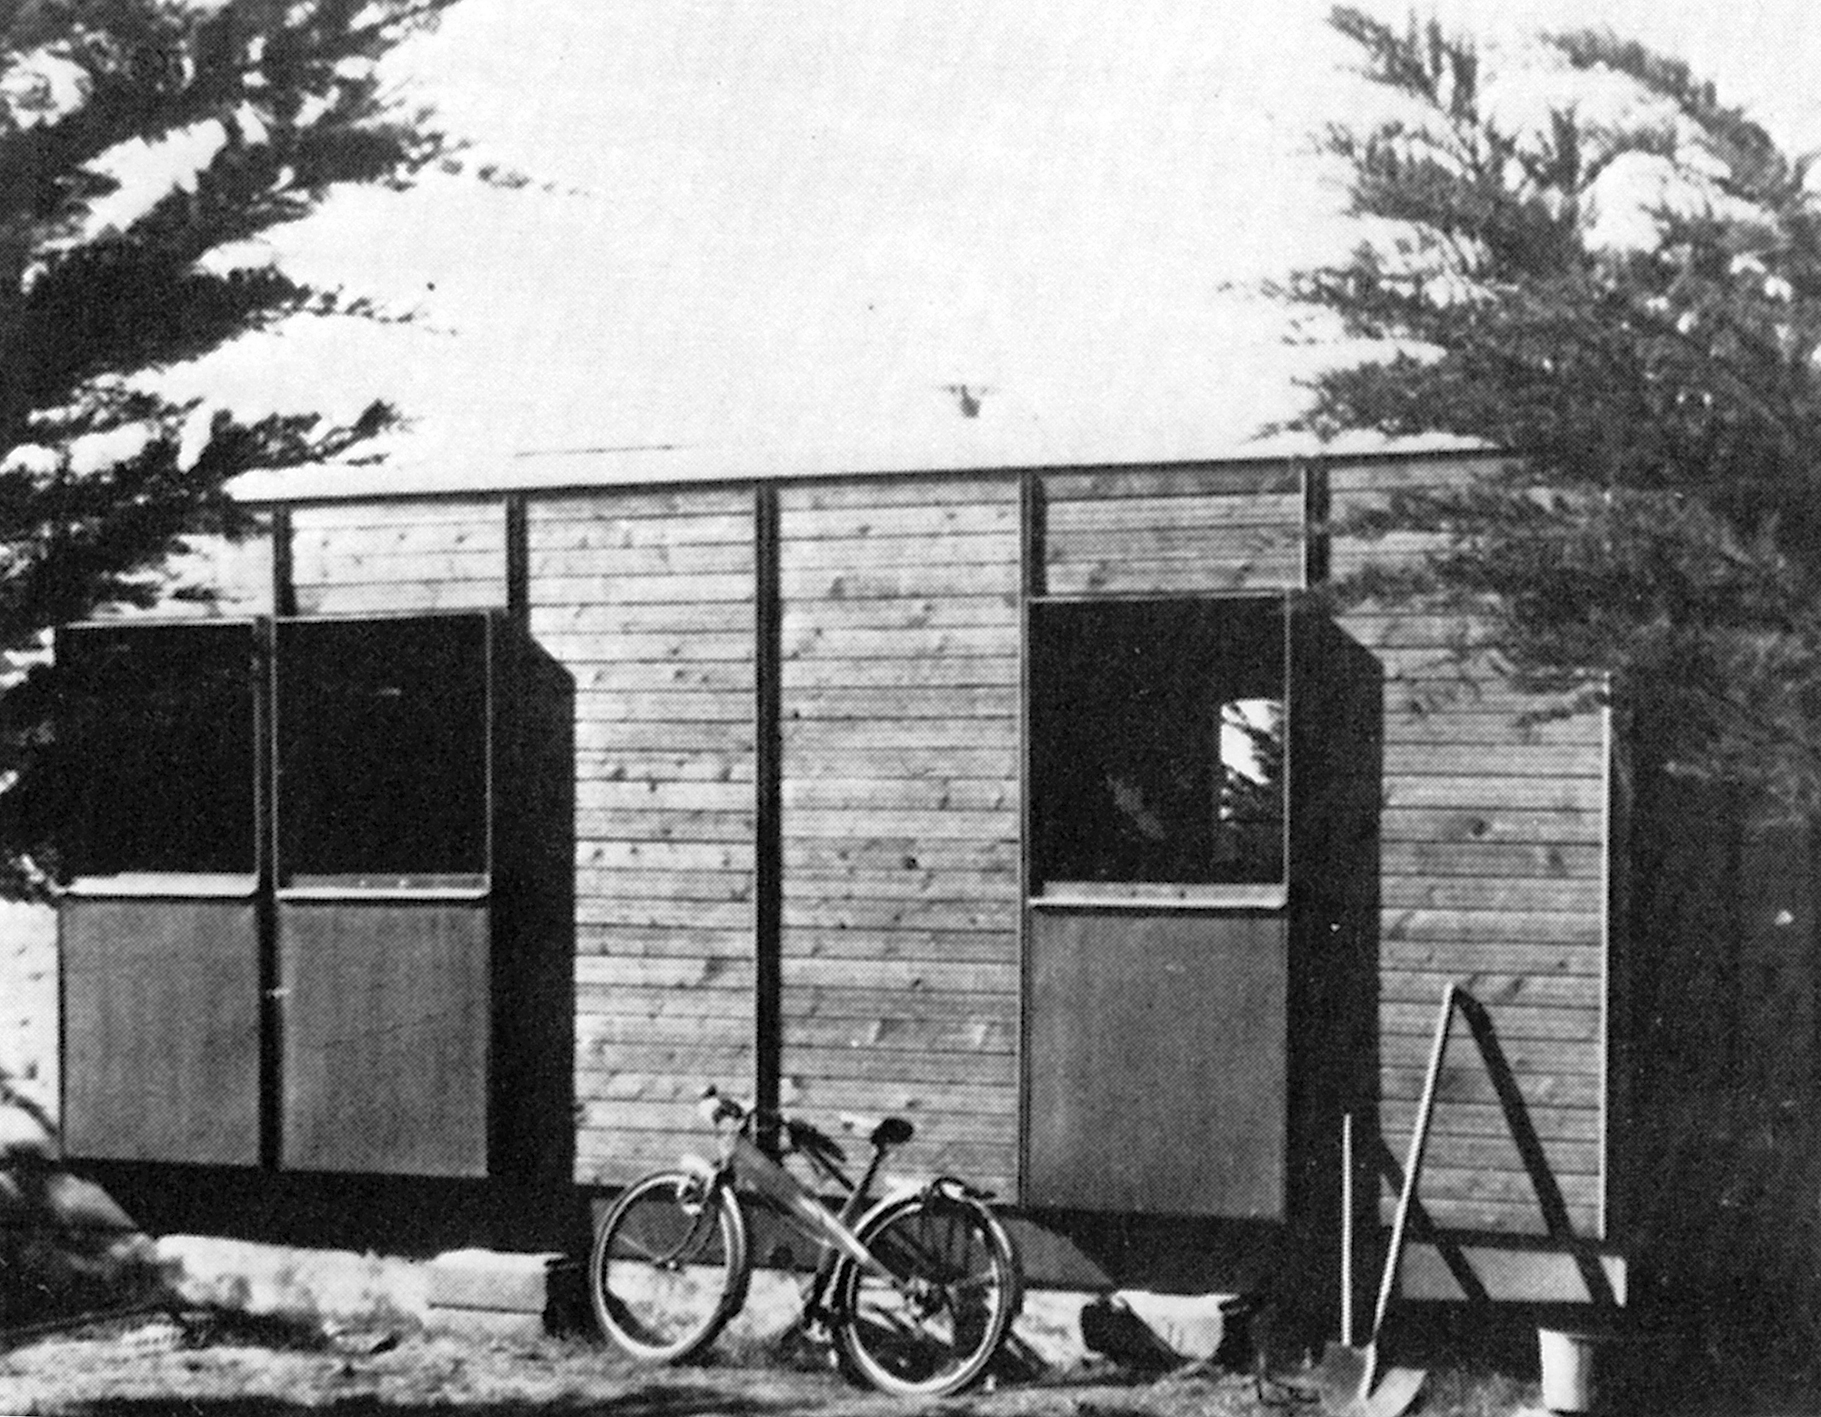 Bicycle in front of the 8x8 demountable house, prototype assembled during the summer for the Prouvé family’s vacation, Carnac, 1946.